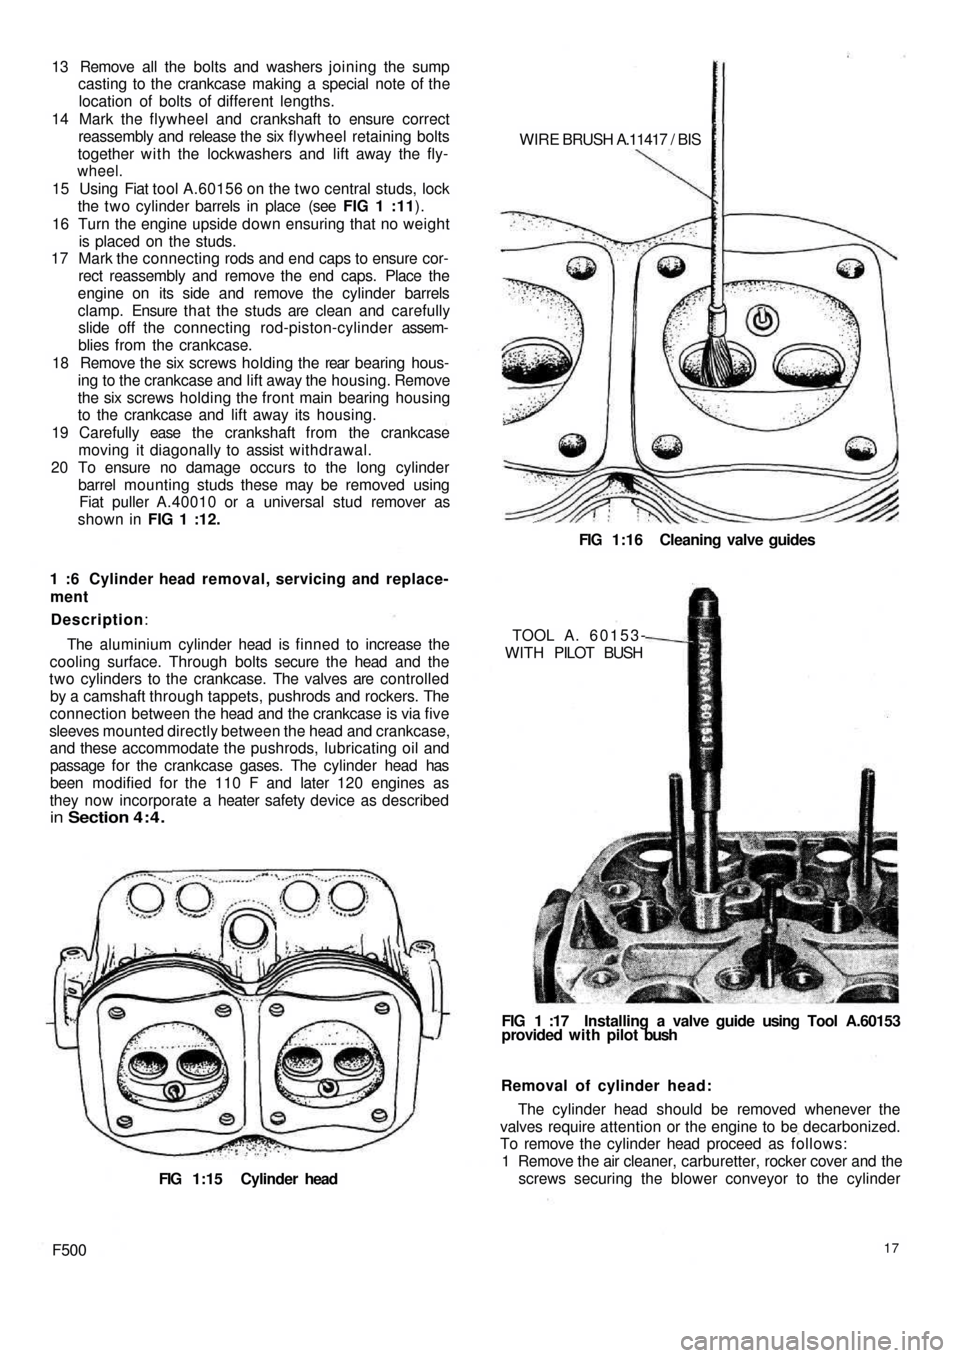 FIAT 500 1968 1.G Workshop Manual 13  Remove all the bolts and washers joining the sump
casting to the crankcase making a special note of the
location of bolts of different lengths.
14 Mark the flywheel and crankshaft to ensure correc